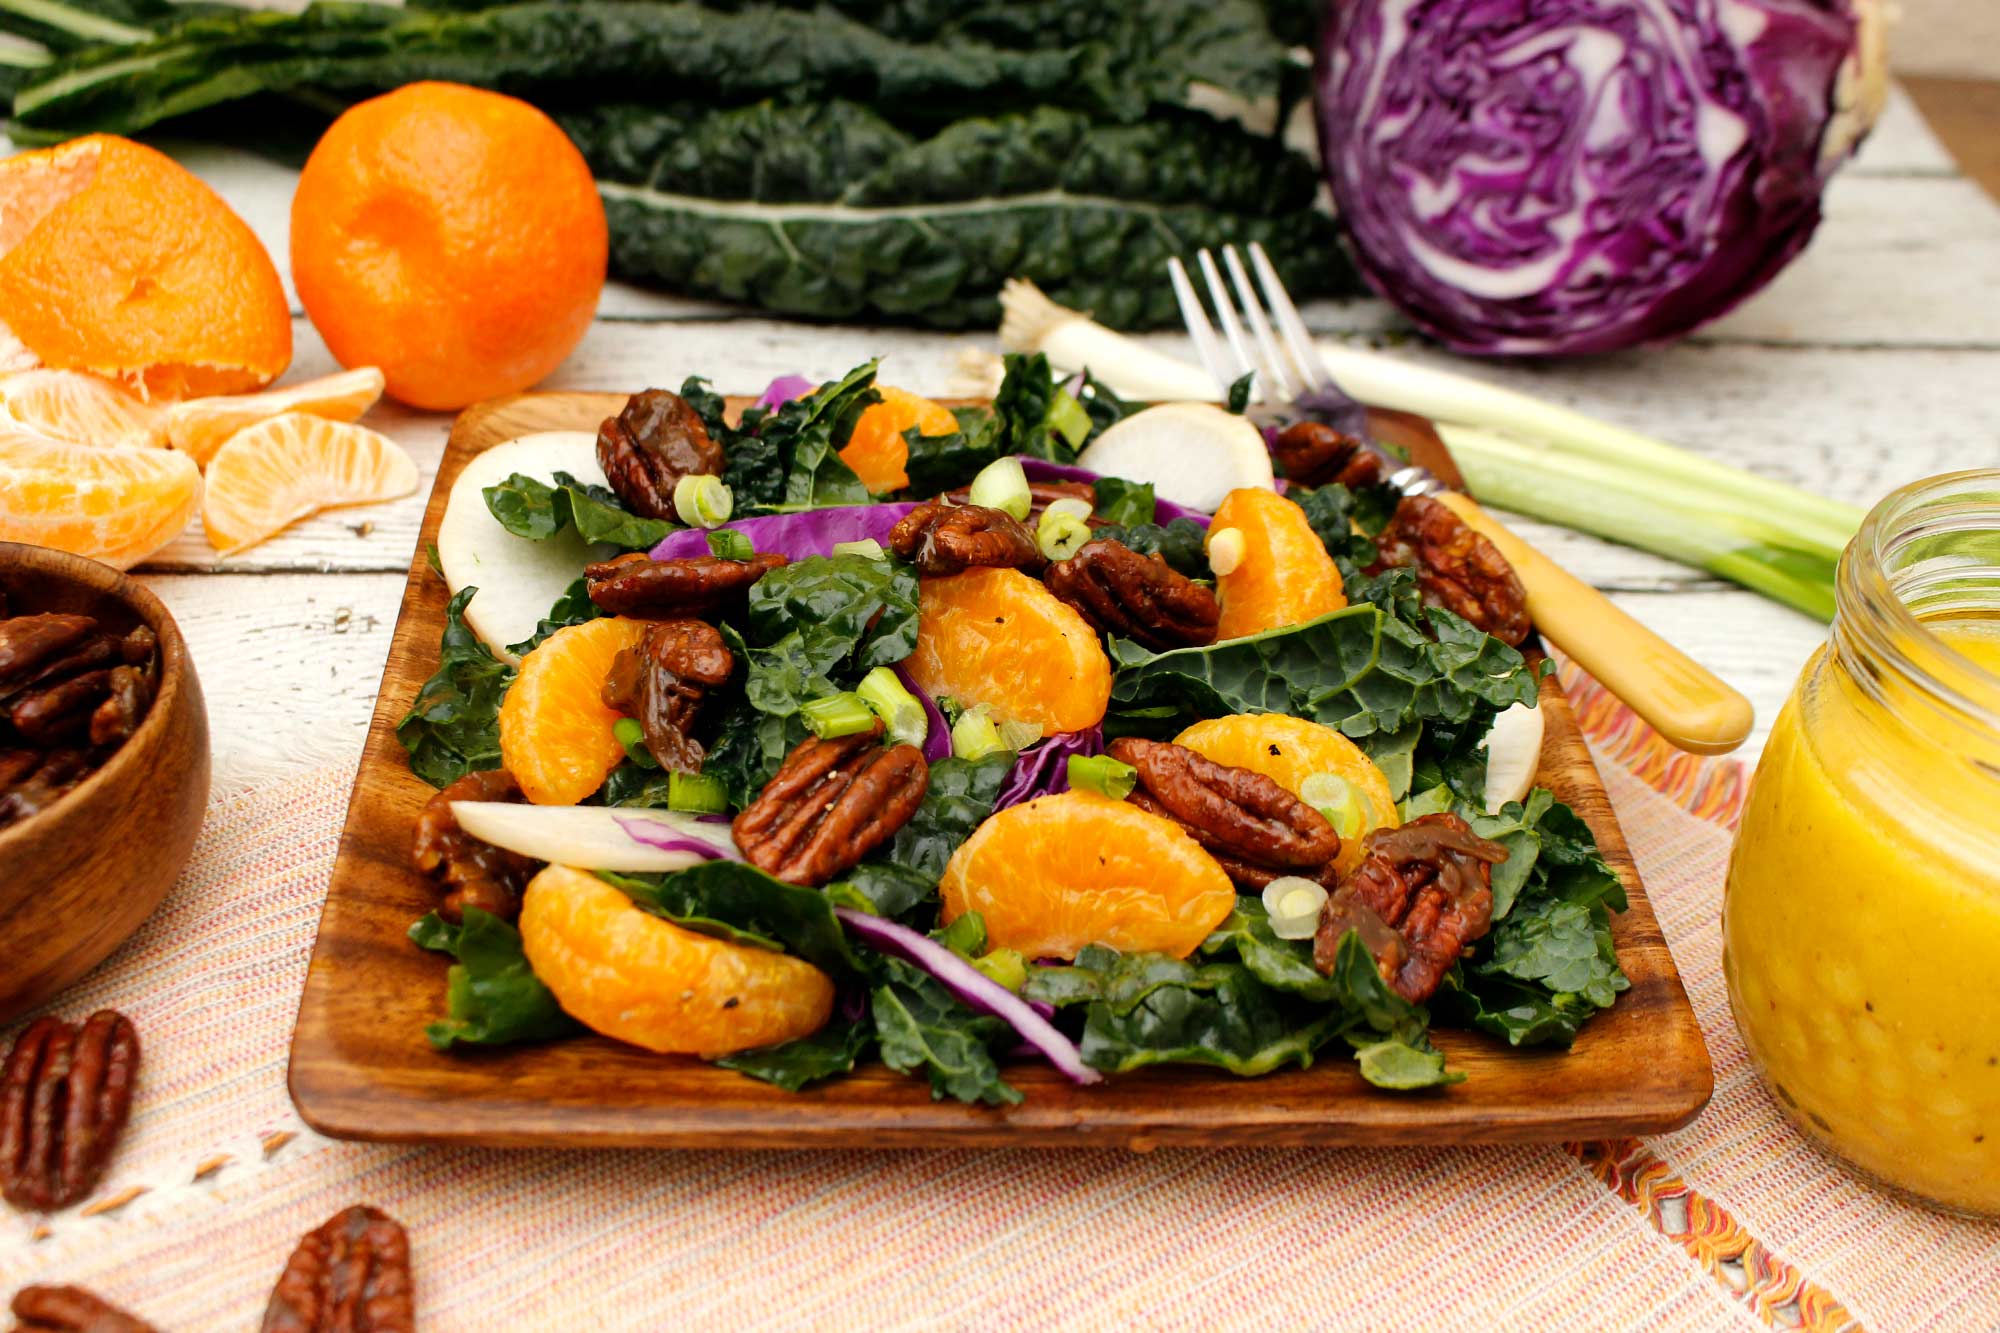 Mandarin Orange and Kale Salad with Candied Pecans